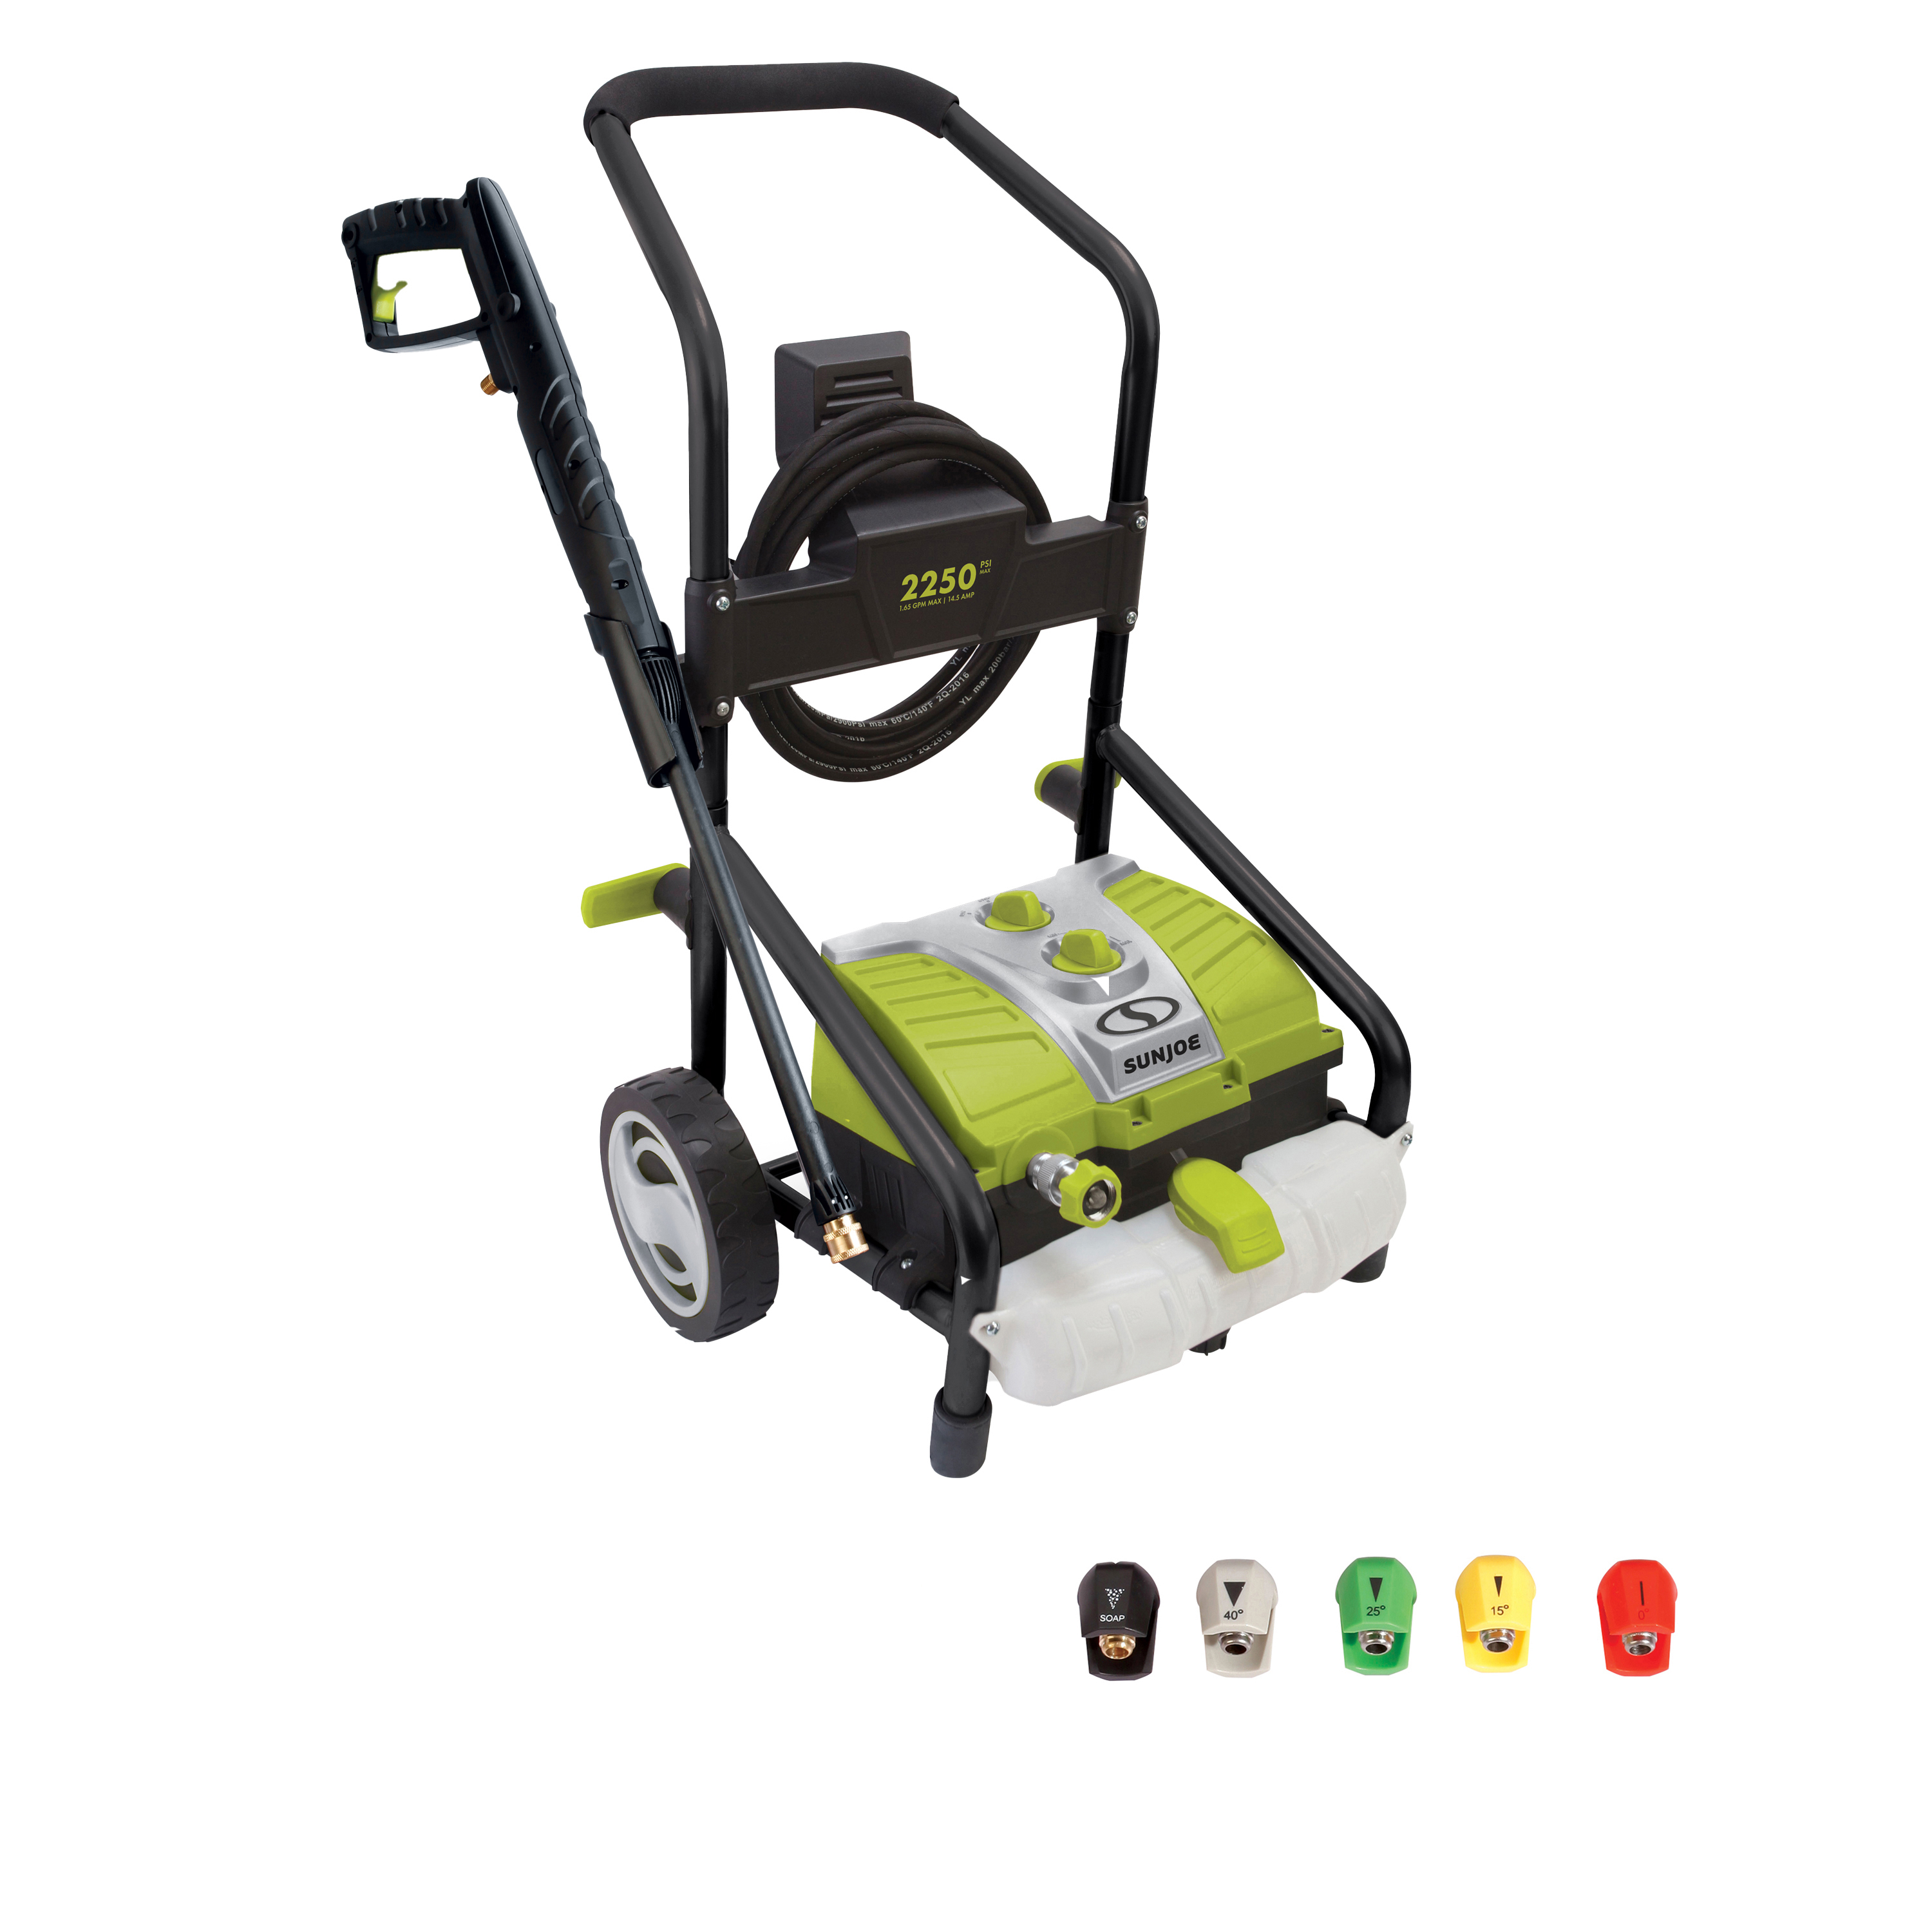 Sun Joe Electric Pressure Washer W/ Quick Connect Nozzles & Extension Wand, 14.5-Amp - image 2 of 8